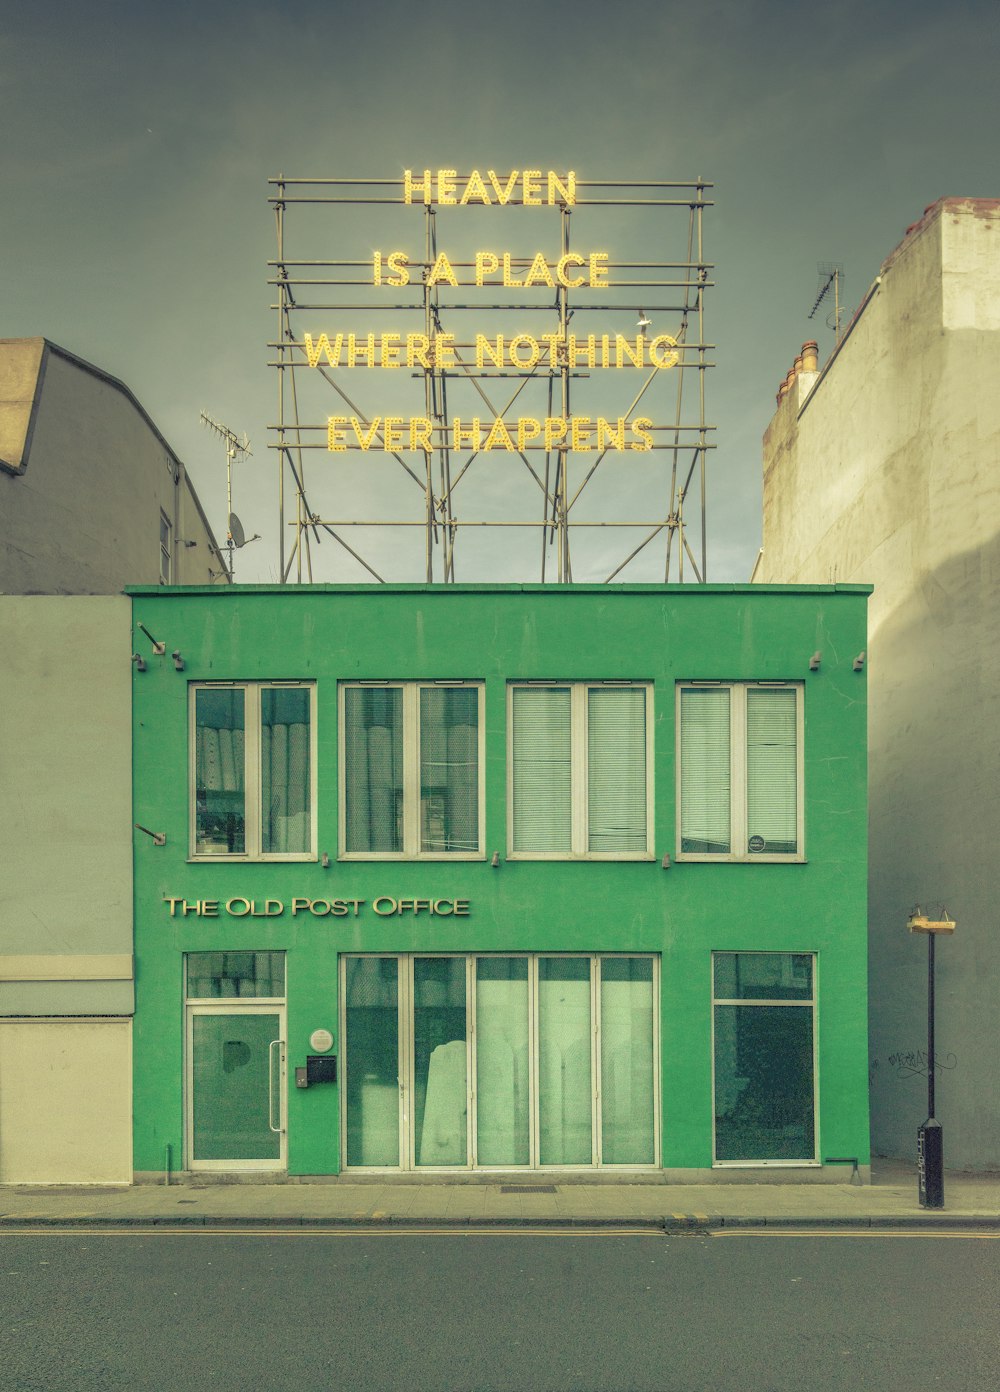 a green building with a neon sign that says heaven is a place where nothing ever